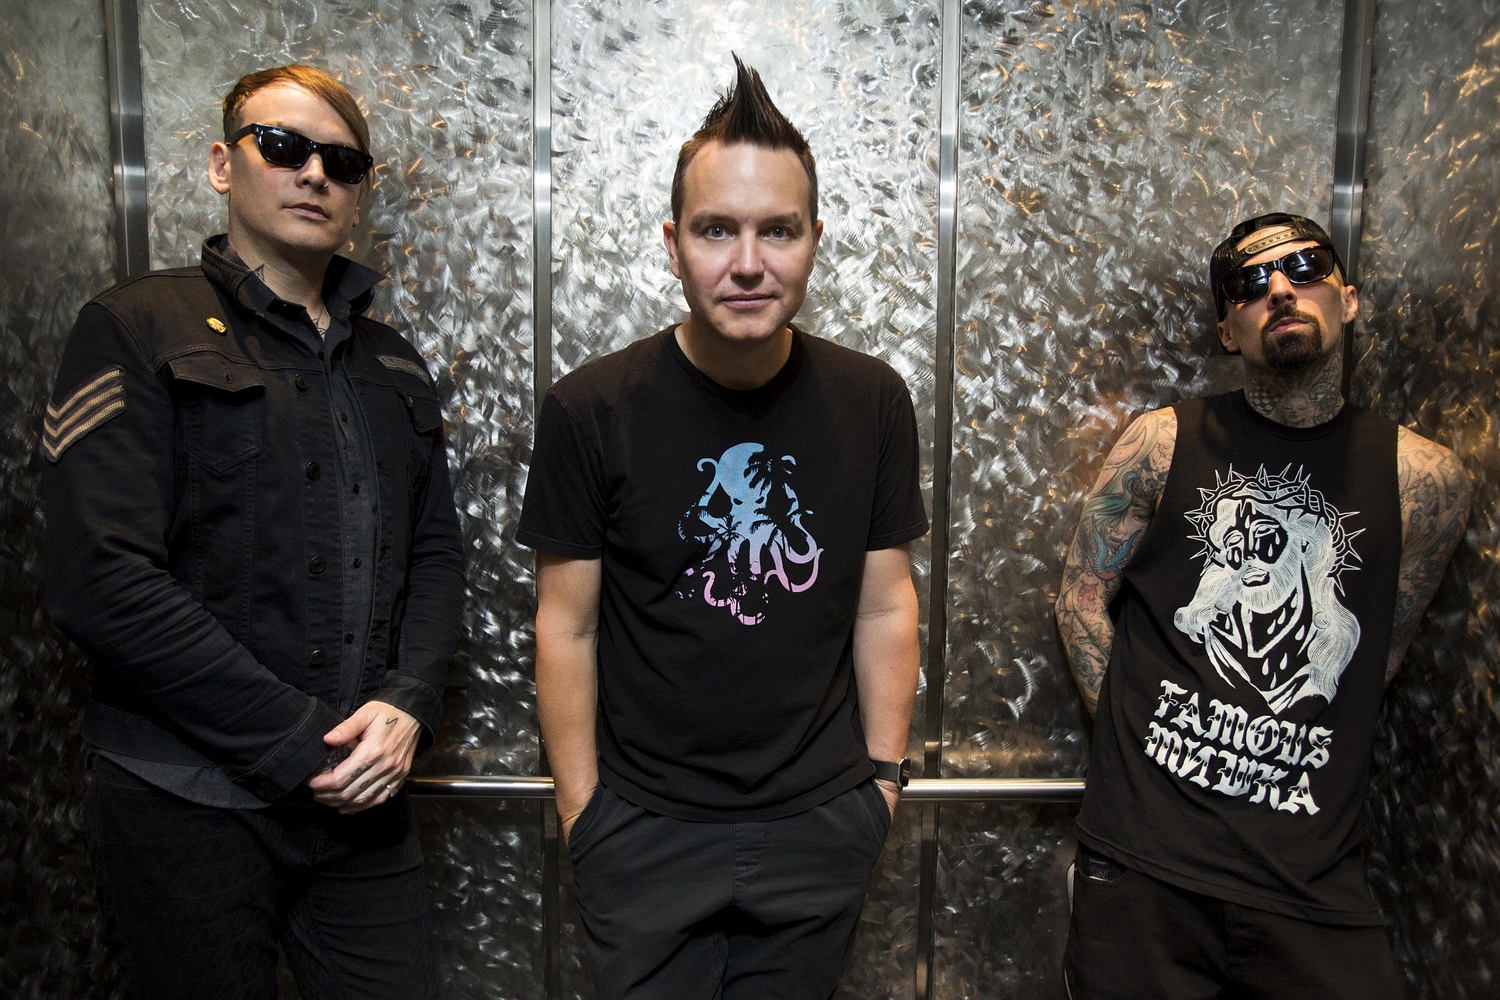 Blink-182 announce huge 2017 arena tour